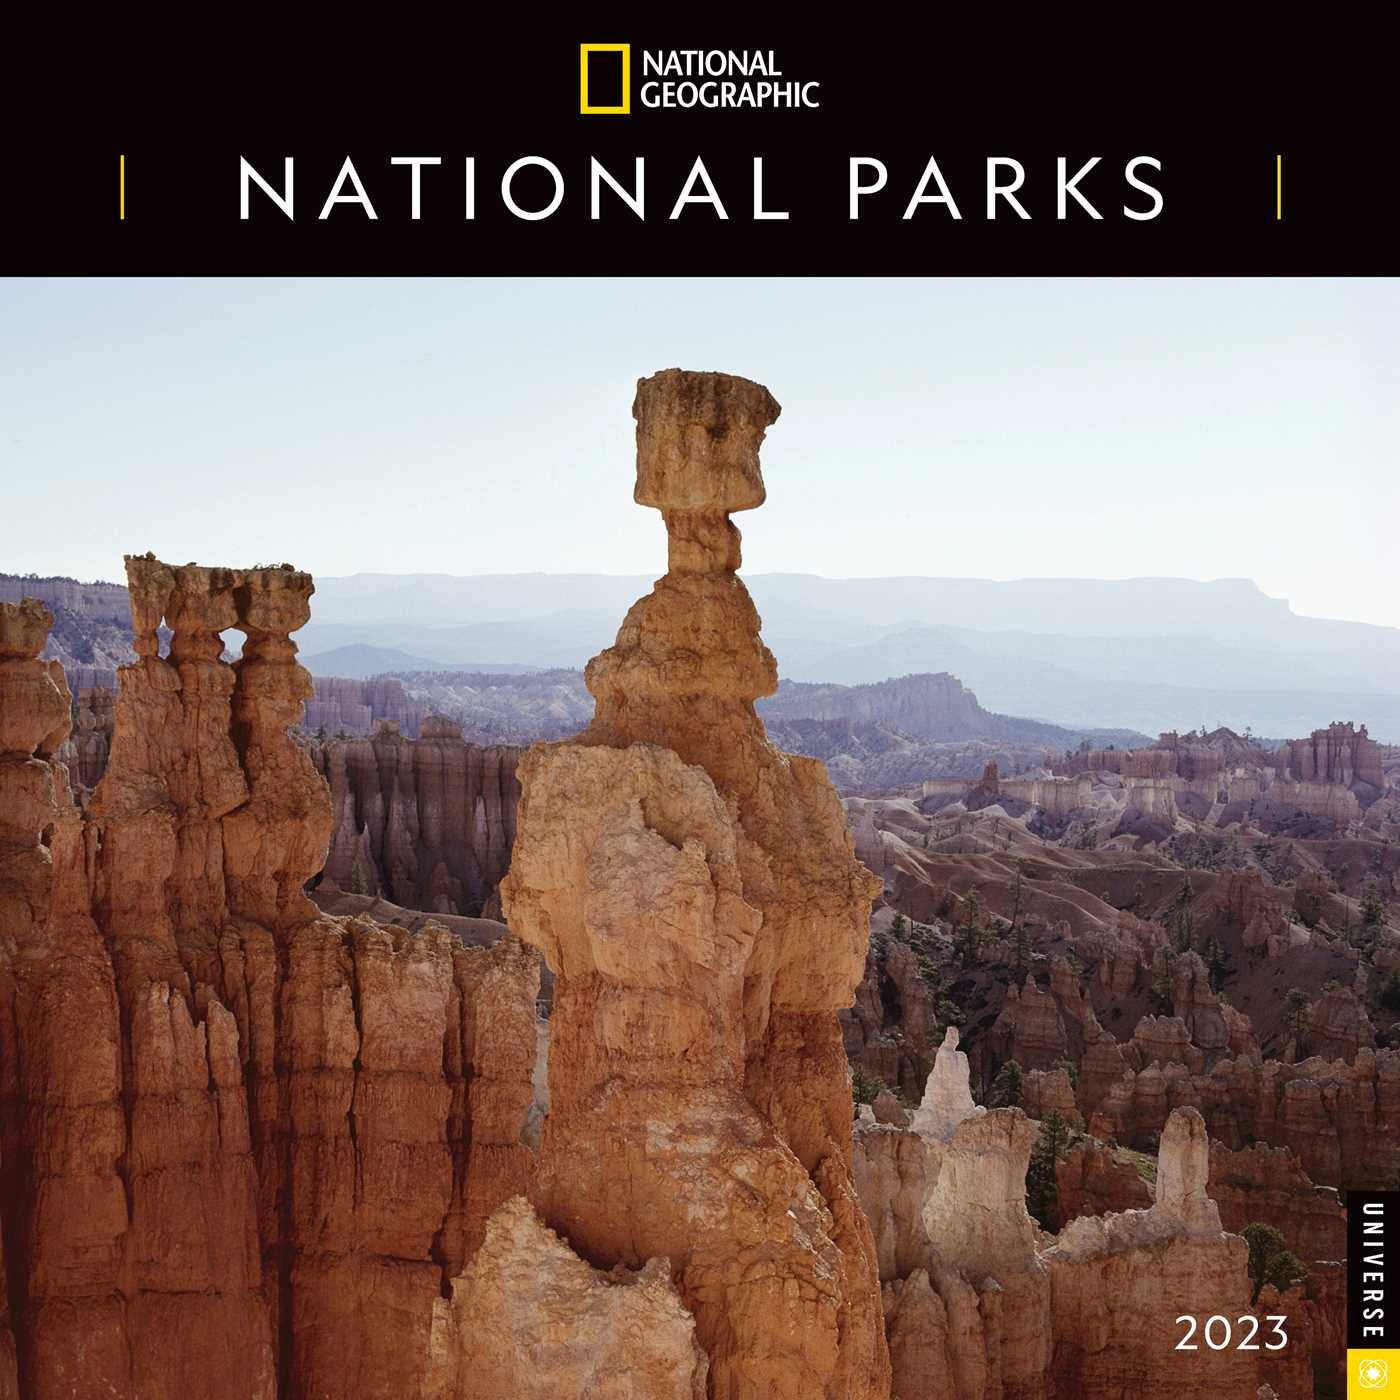 National Geographic National Parks 2023 Wall Calendar